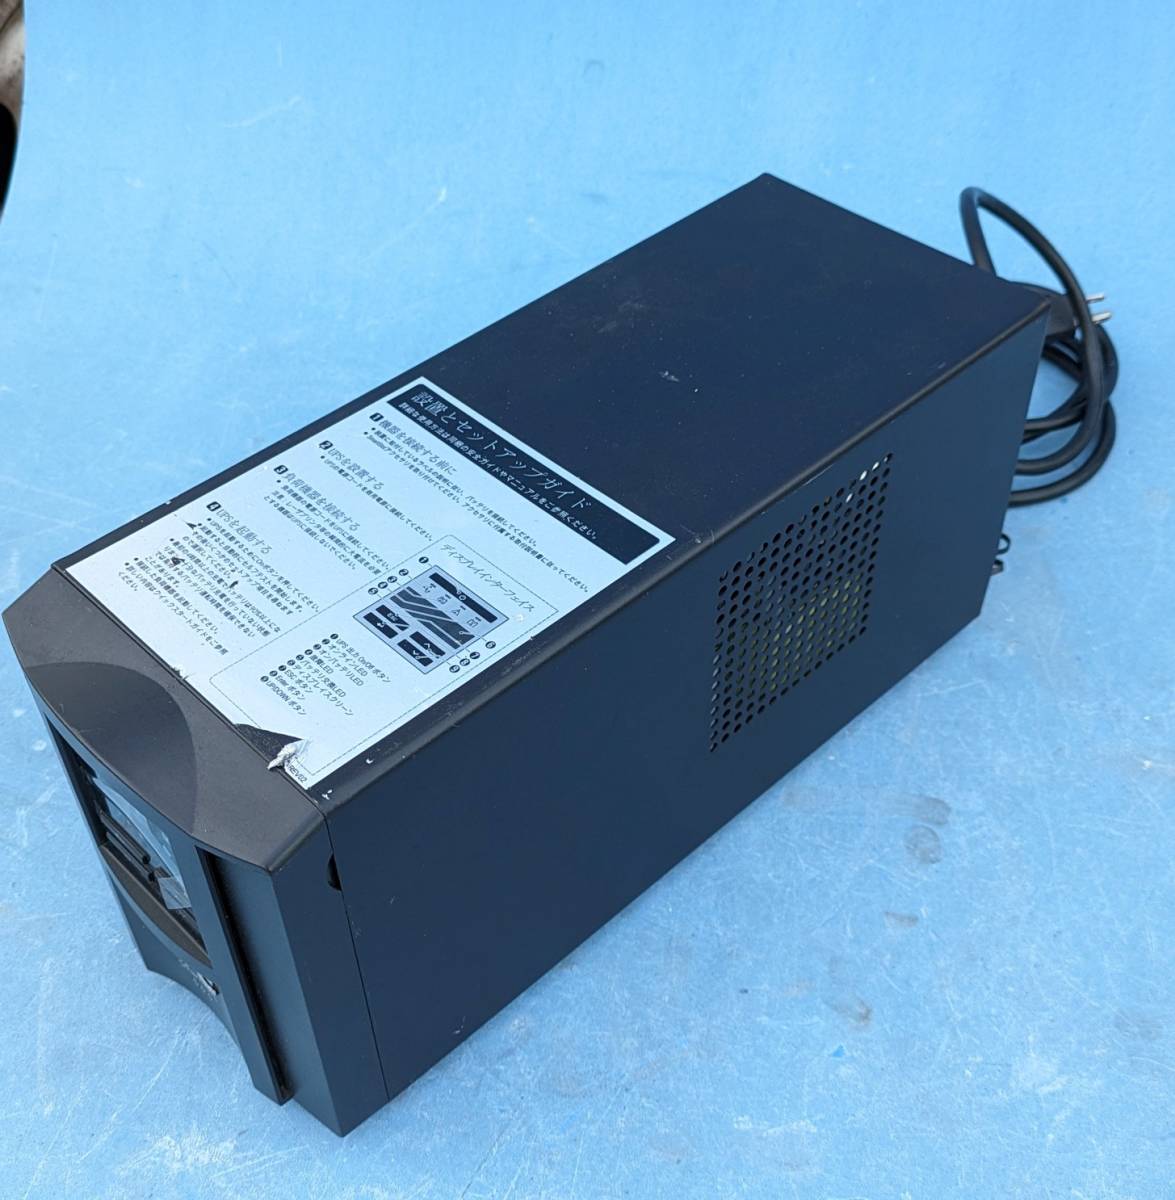 APC made Smart-UPS 500 UPS model SMT500J liquid crystal display battery is disposal did therefore is not attached postage details is commodity explanation . recorded 